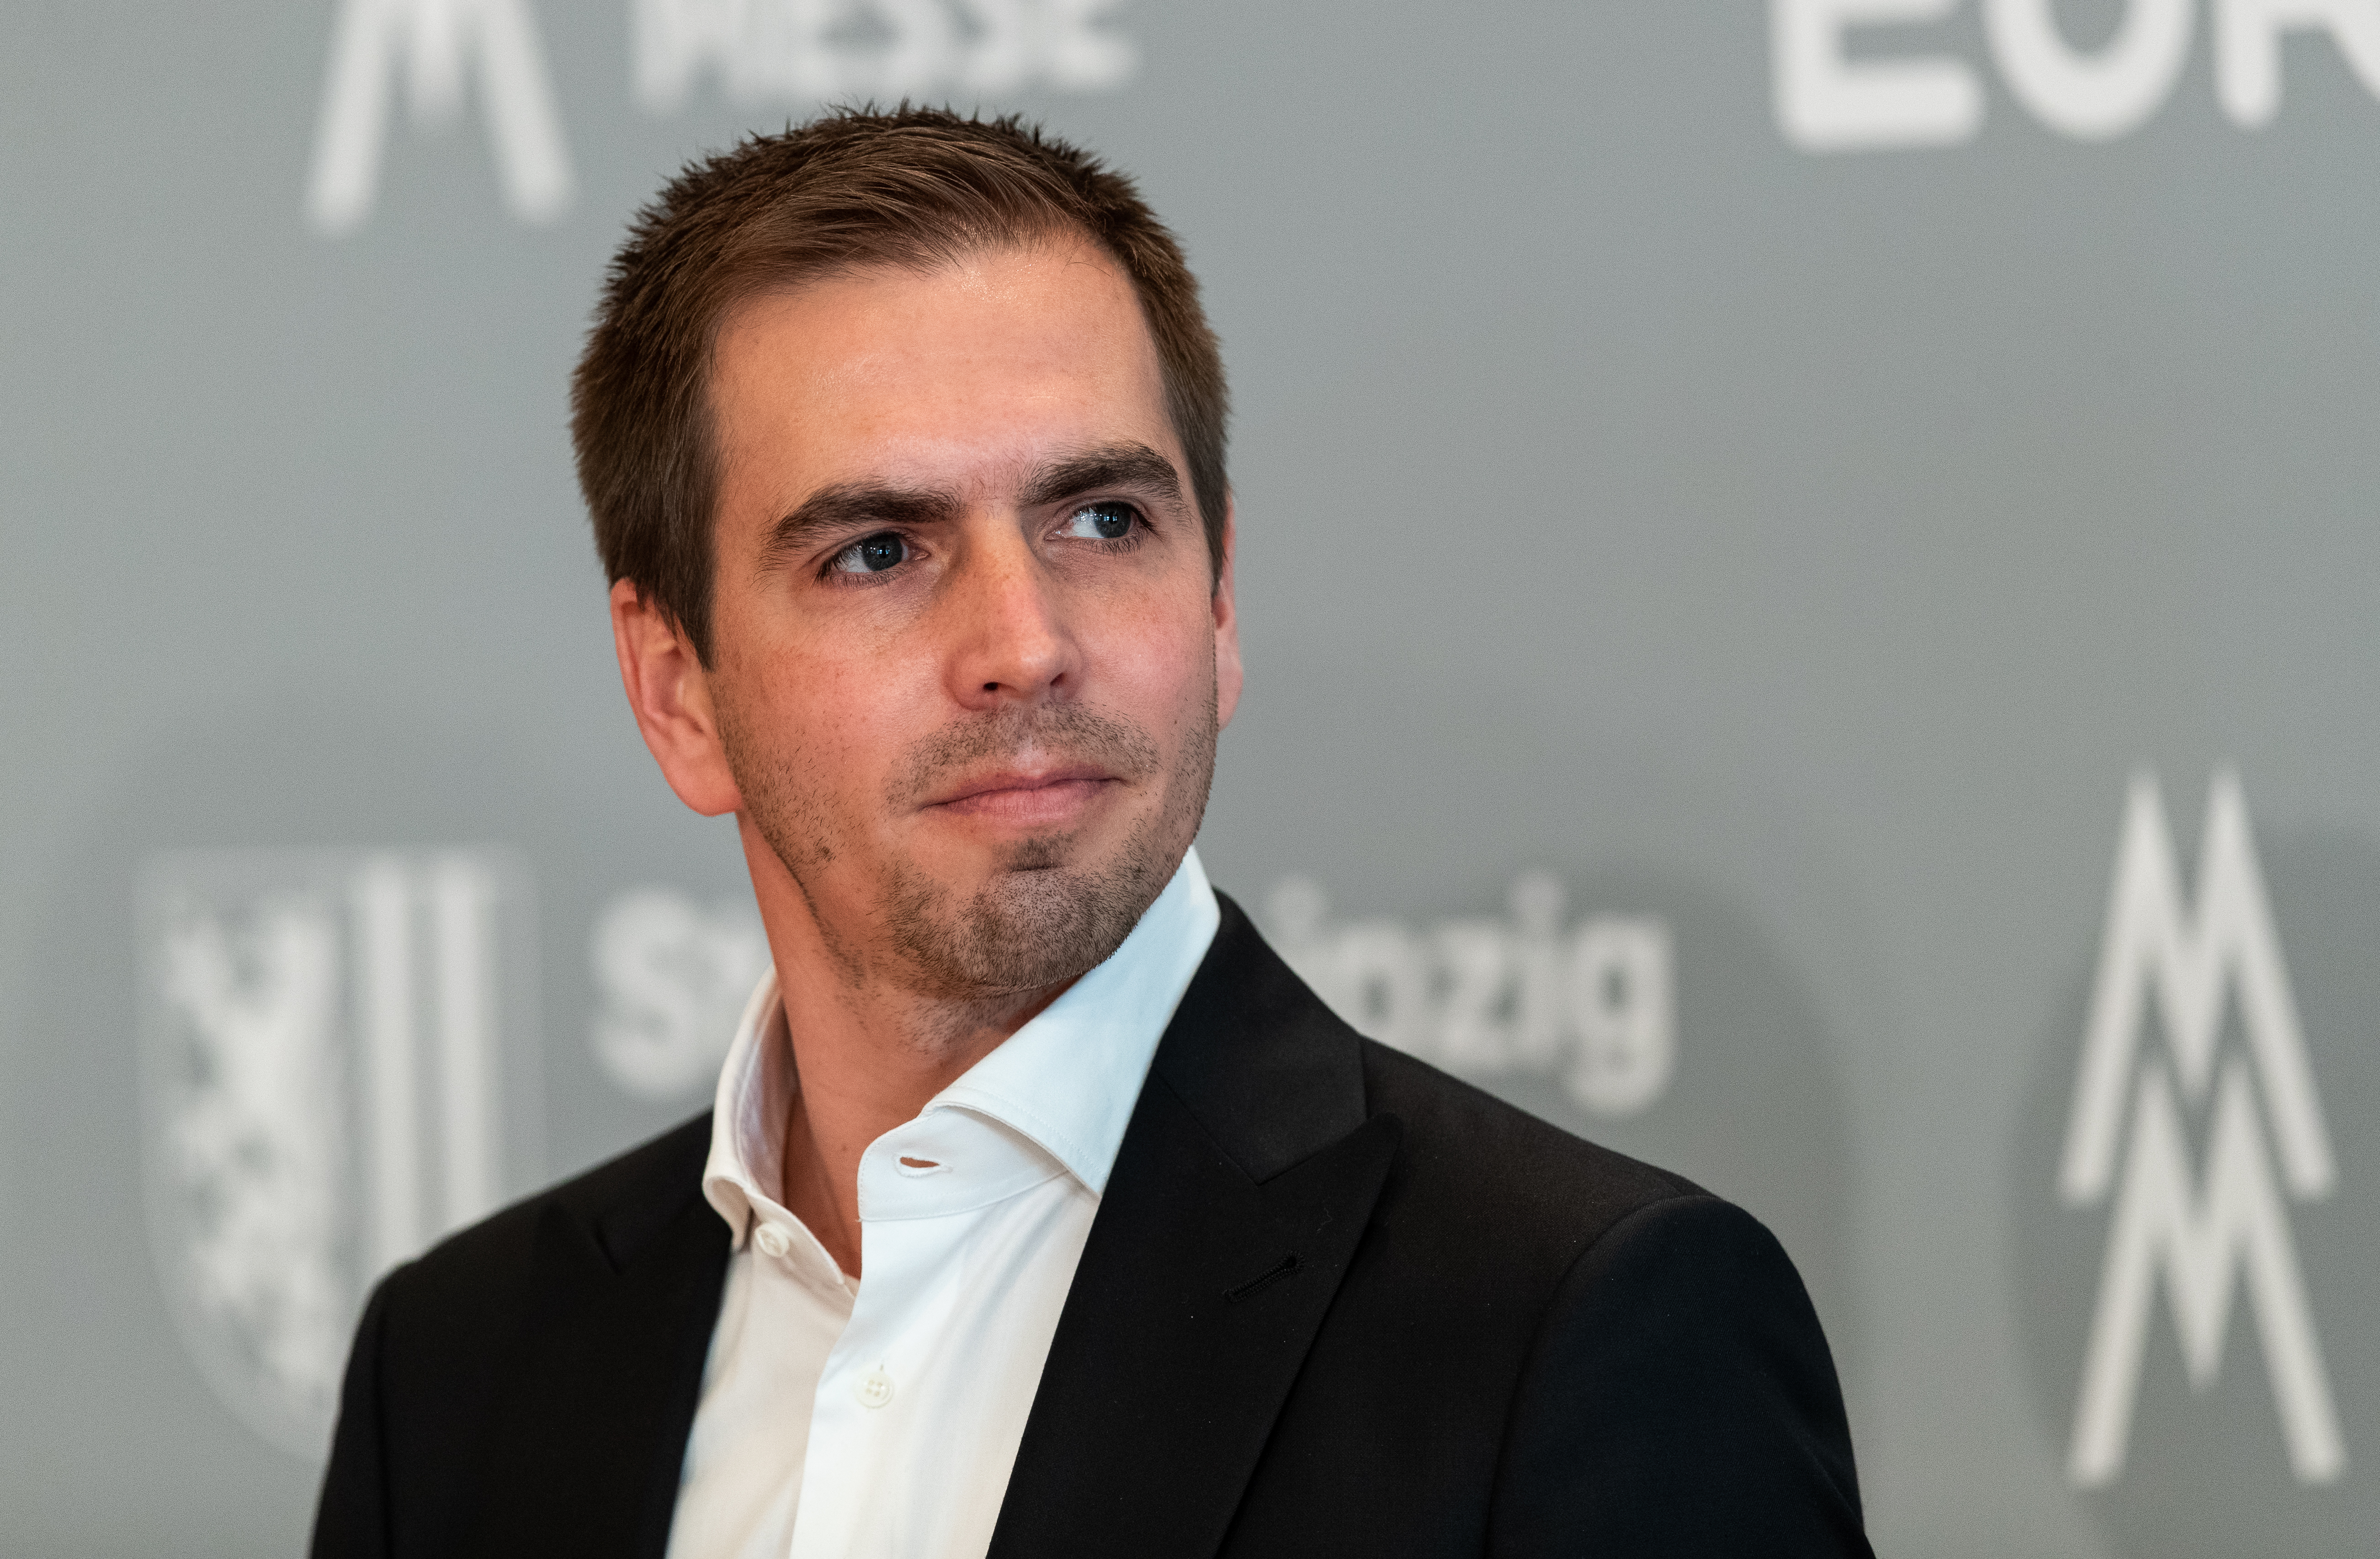 LEIPZIG, GERMANY - DECEMBER 08: Philipp Lahm, general manager of the DFB EURO GMBH attends the official press conference, as the city of leipzig is unveiled as the location for the International Broadcast Centre (IBC) of the UEFA Euro 2024 at Messe Leipzig on December 08, 2020 in Leipzig, Germany.